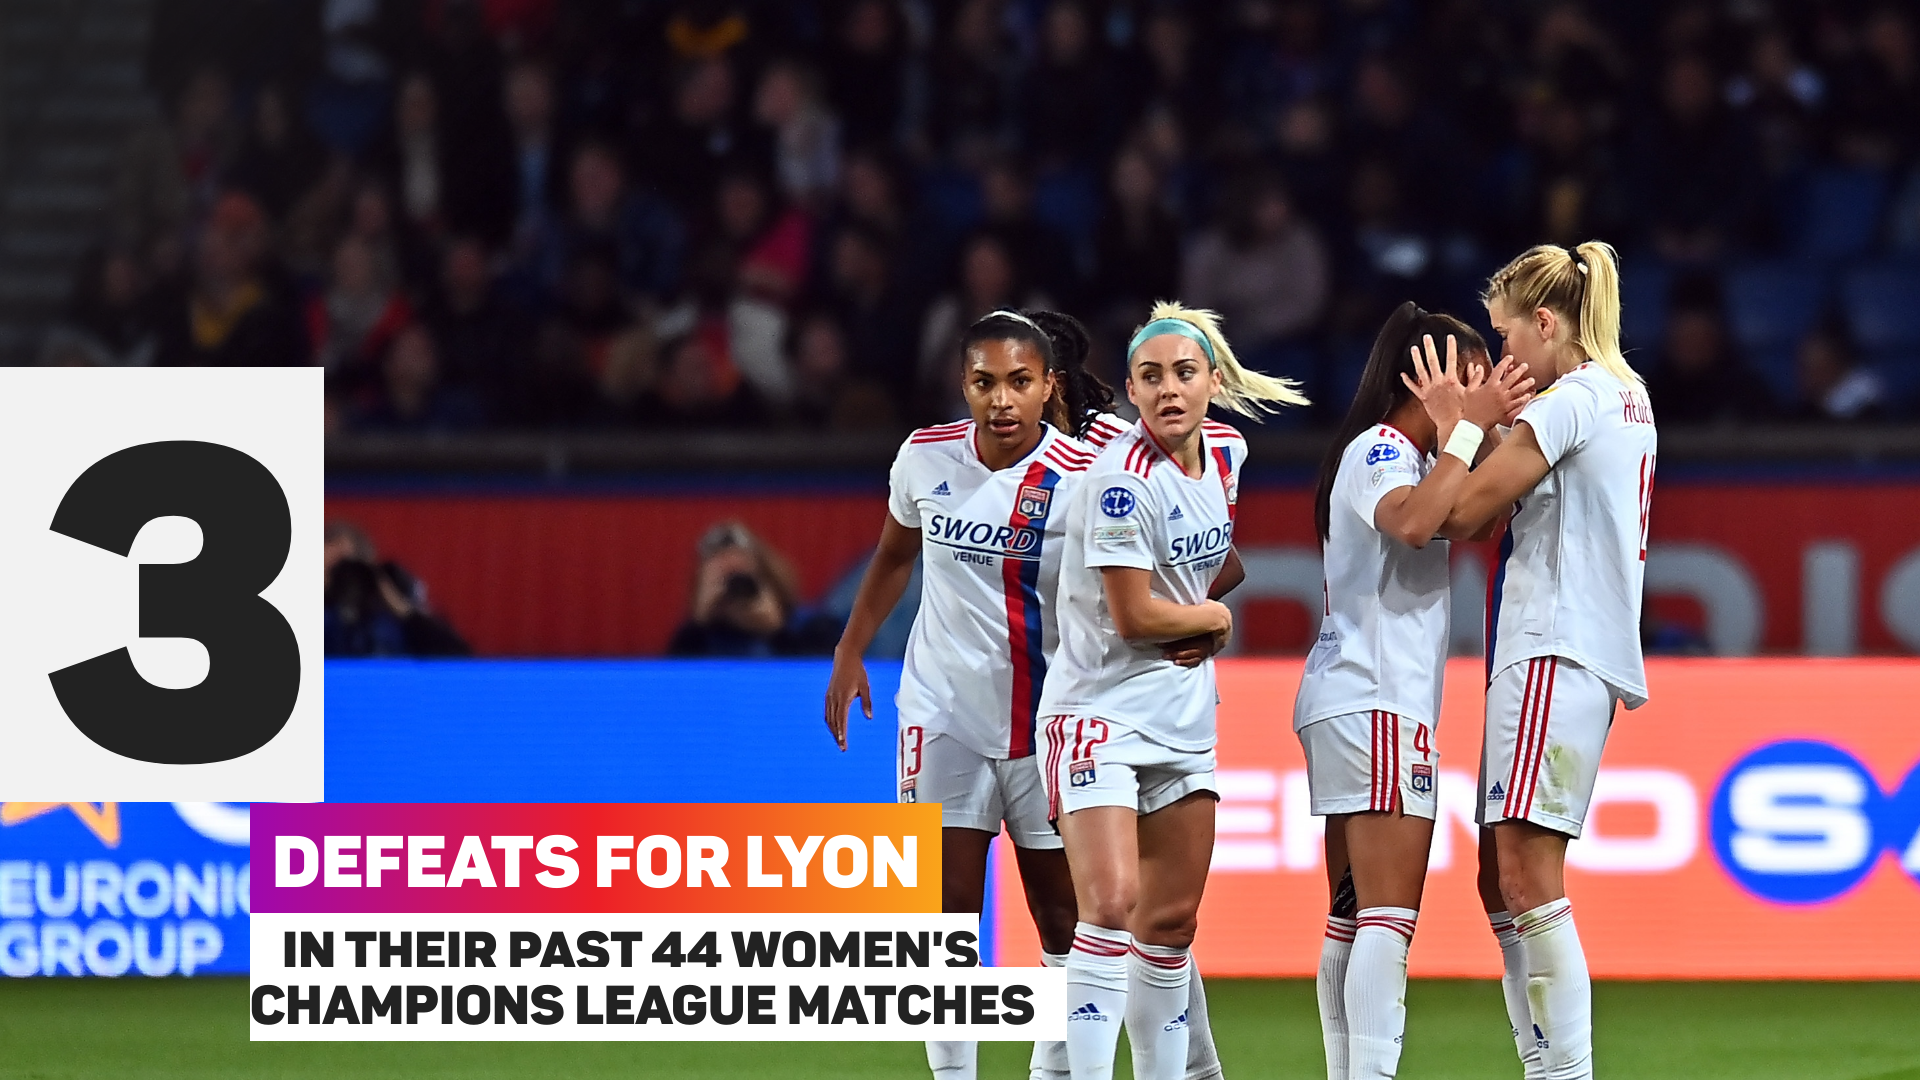 Lyon have lost just 33 of their past 44 Women's Champions League games